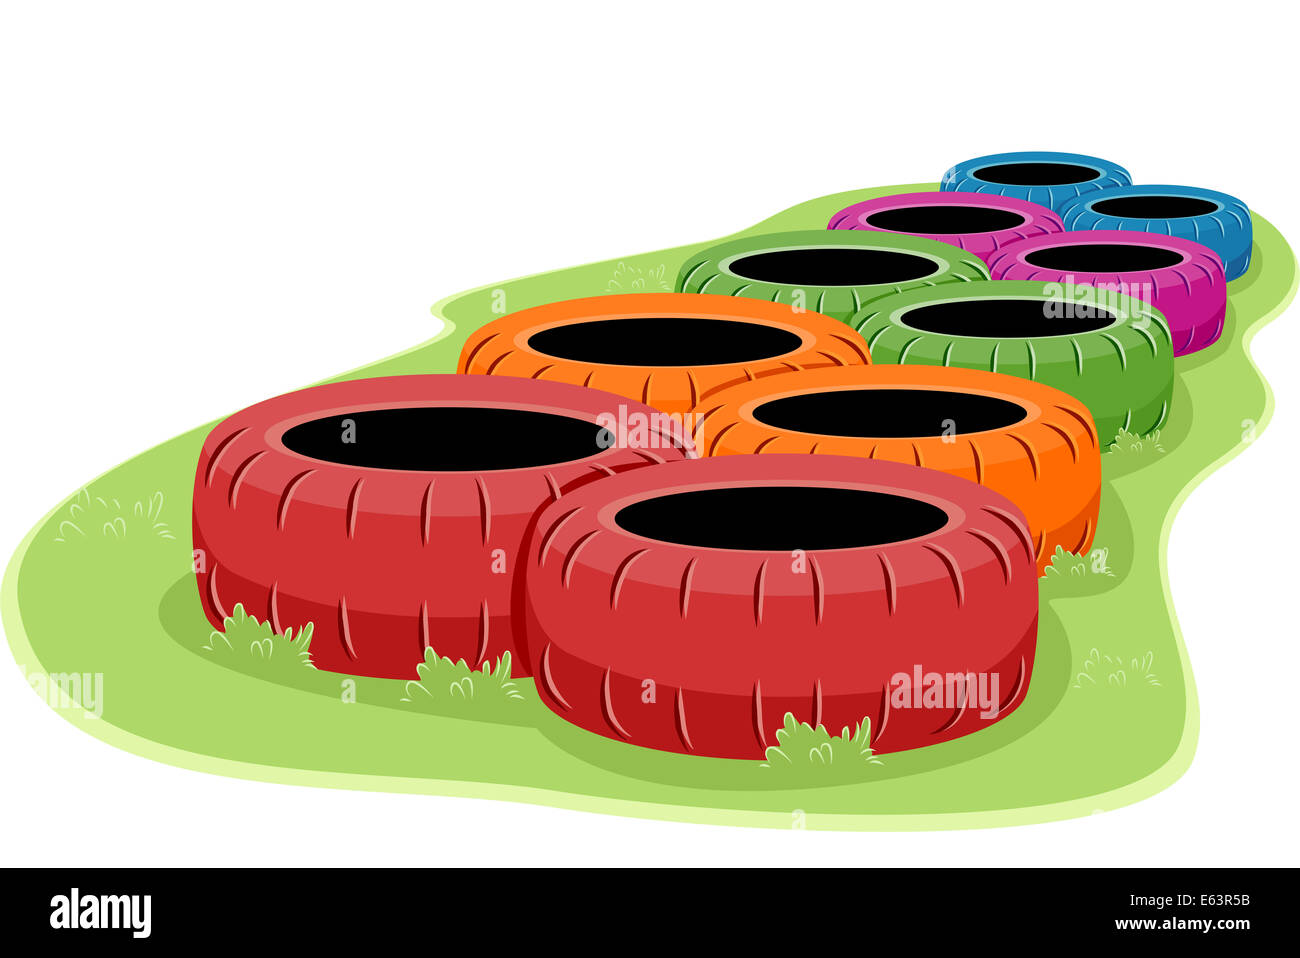 Illustration of a Set of Tires in an Obstacle Course Stock Photo